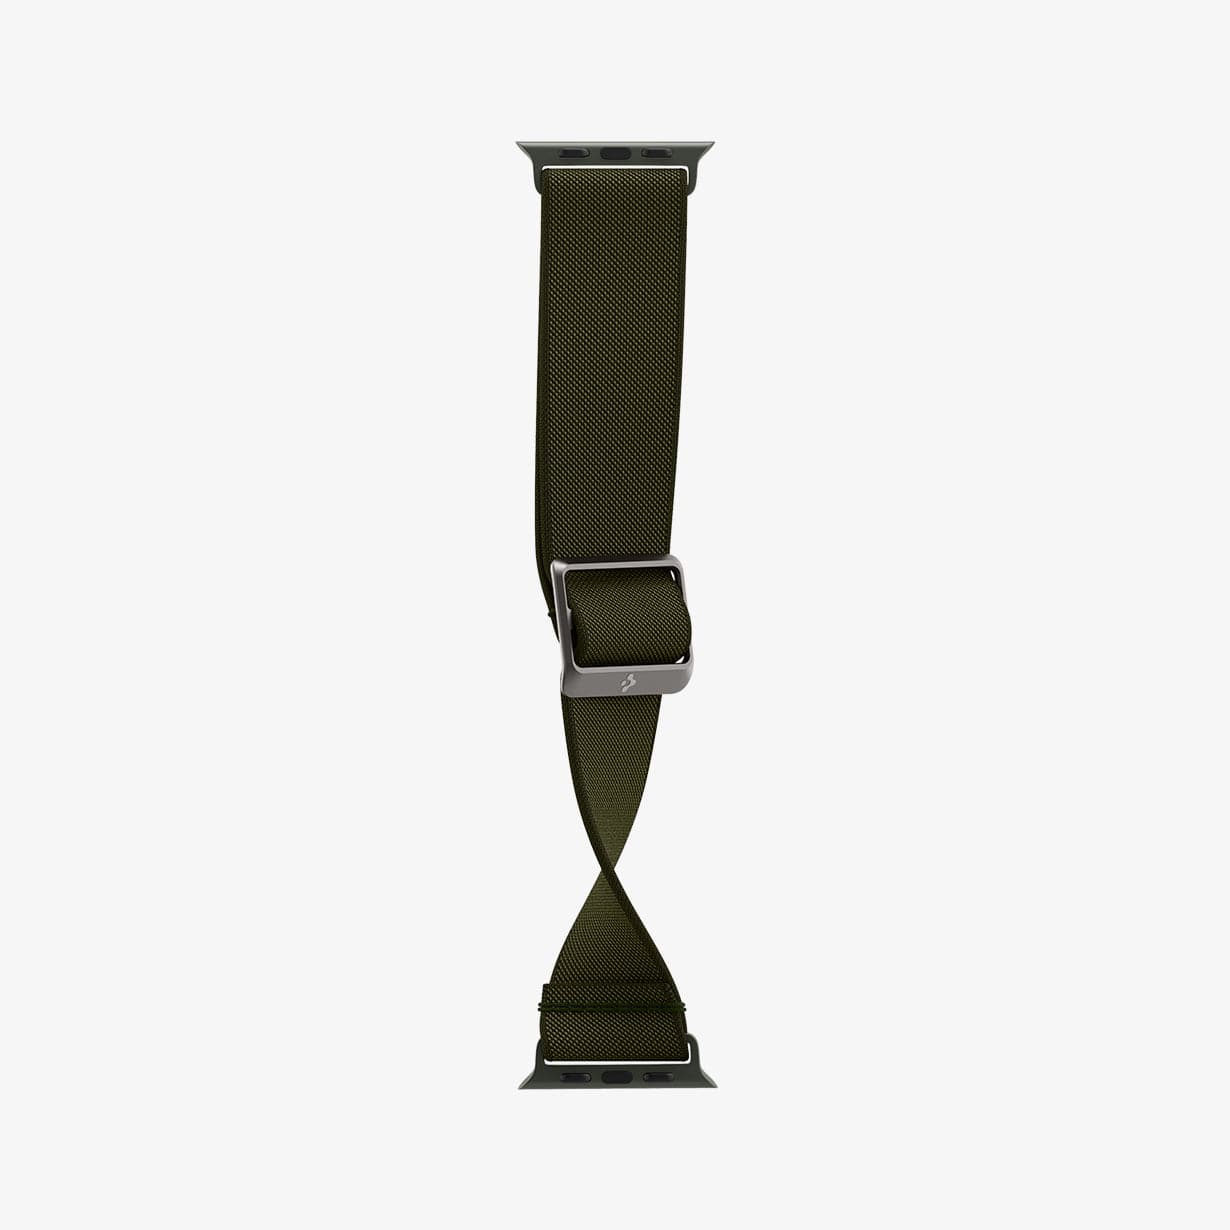 AMP02292 - Apple Watch Series (Apple Watch (41mm)/Apple Watch (38mm)) Watch Band Lite Fit in khaki showing the watch band bending to show the durability